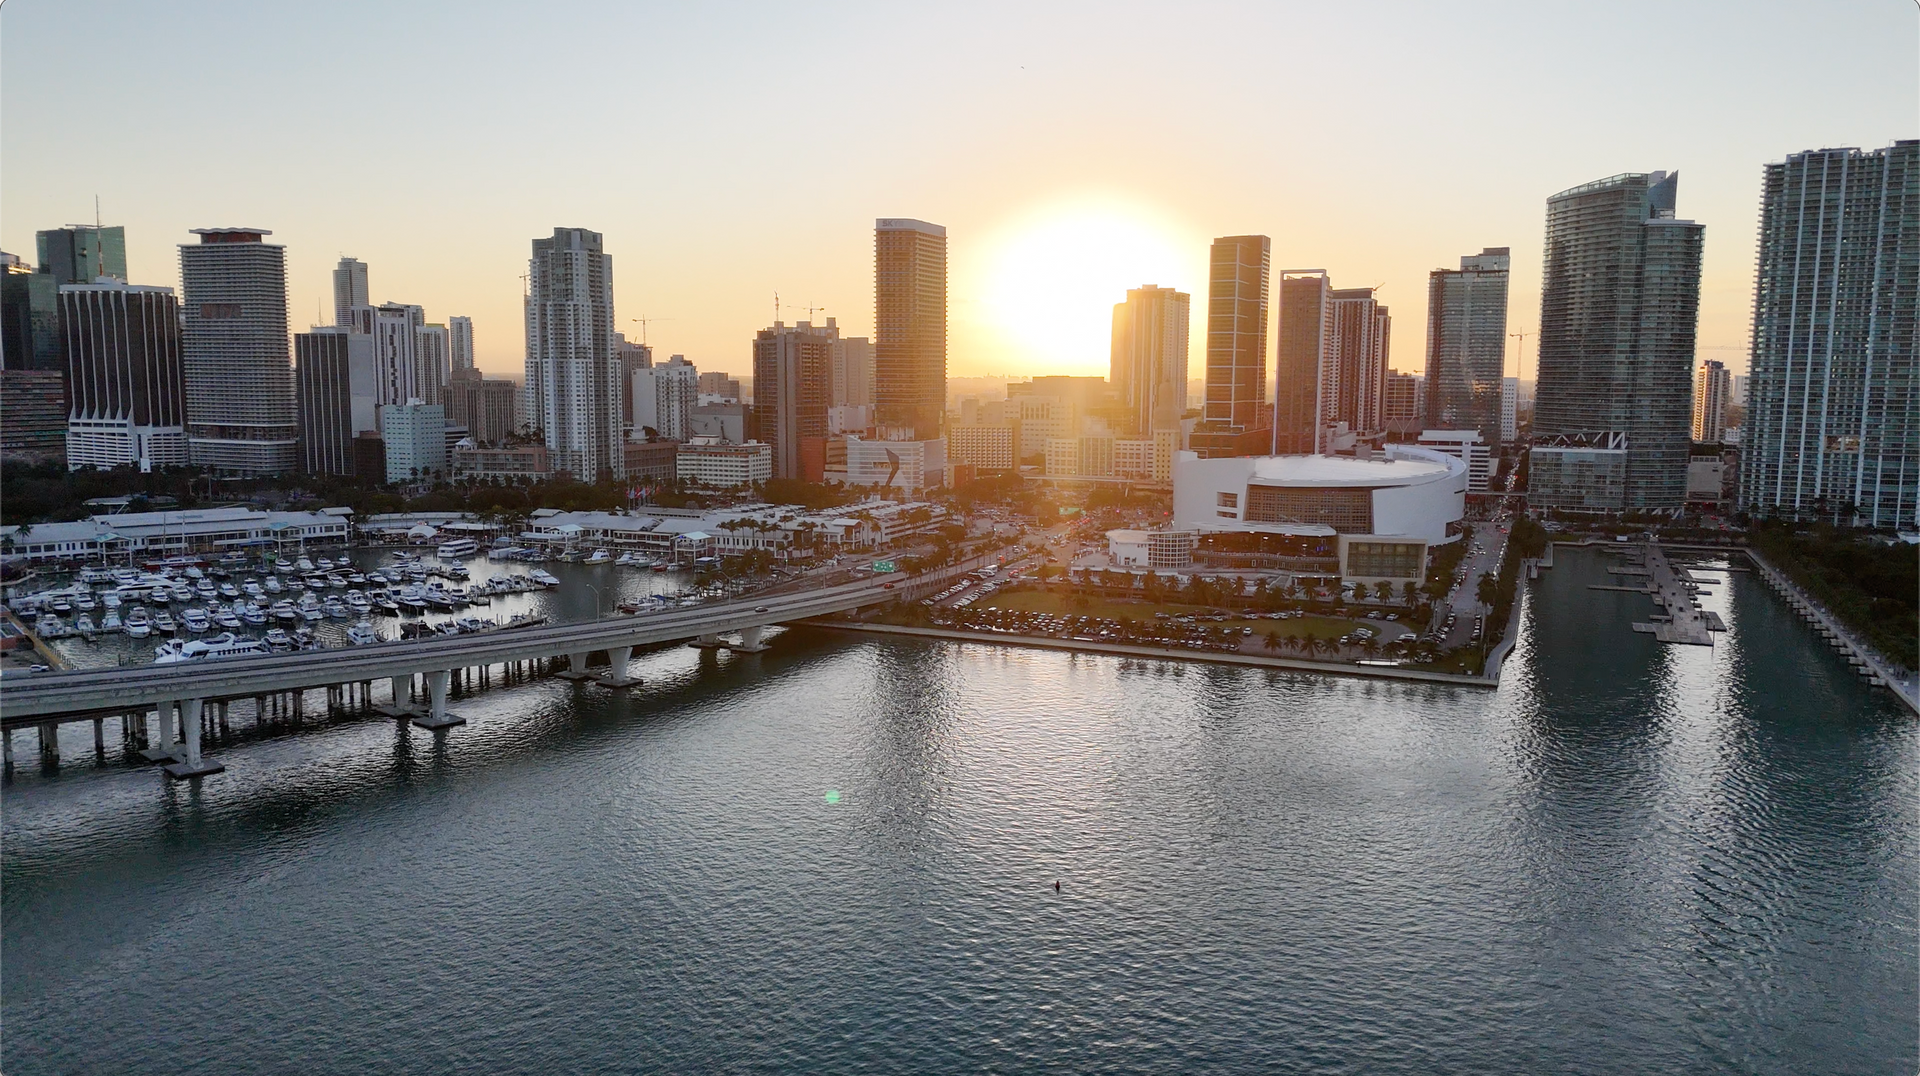 Star island is beautiful, especially during the sunset cruise. Visit biscayne bay star island today on a sunset cruise 